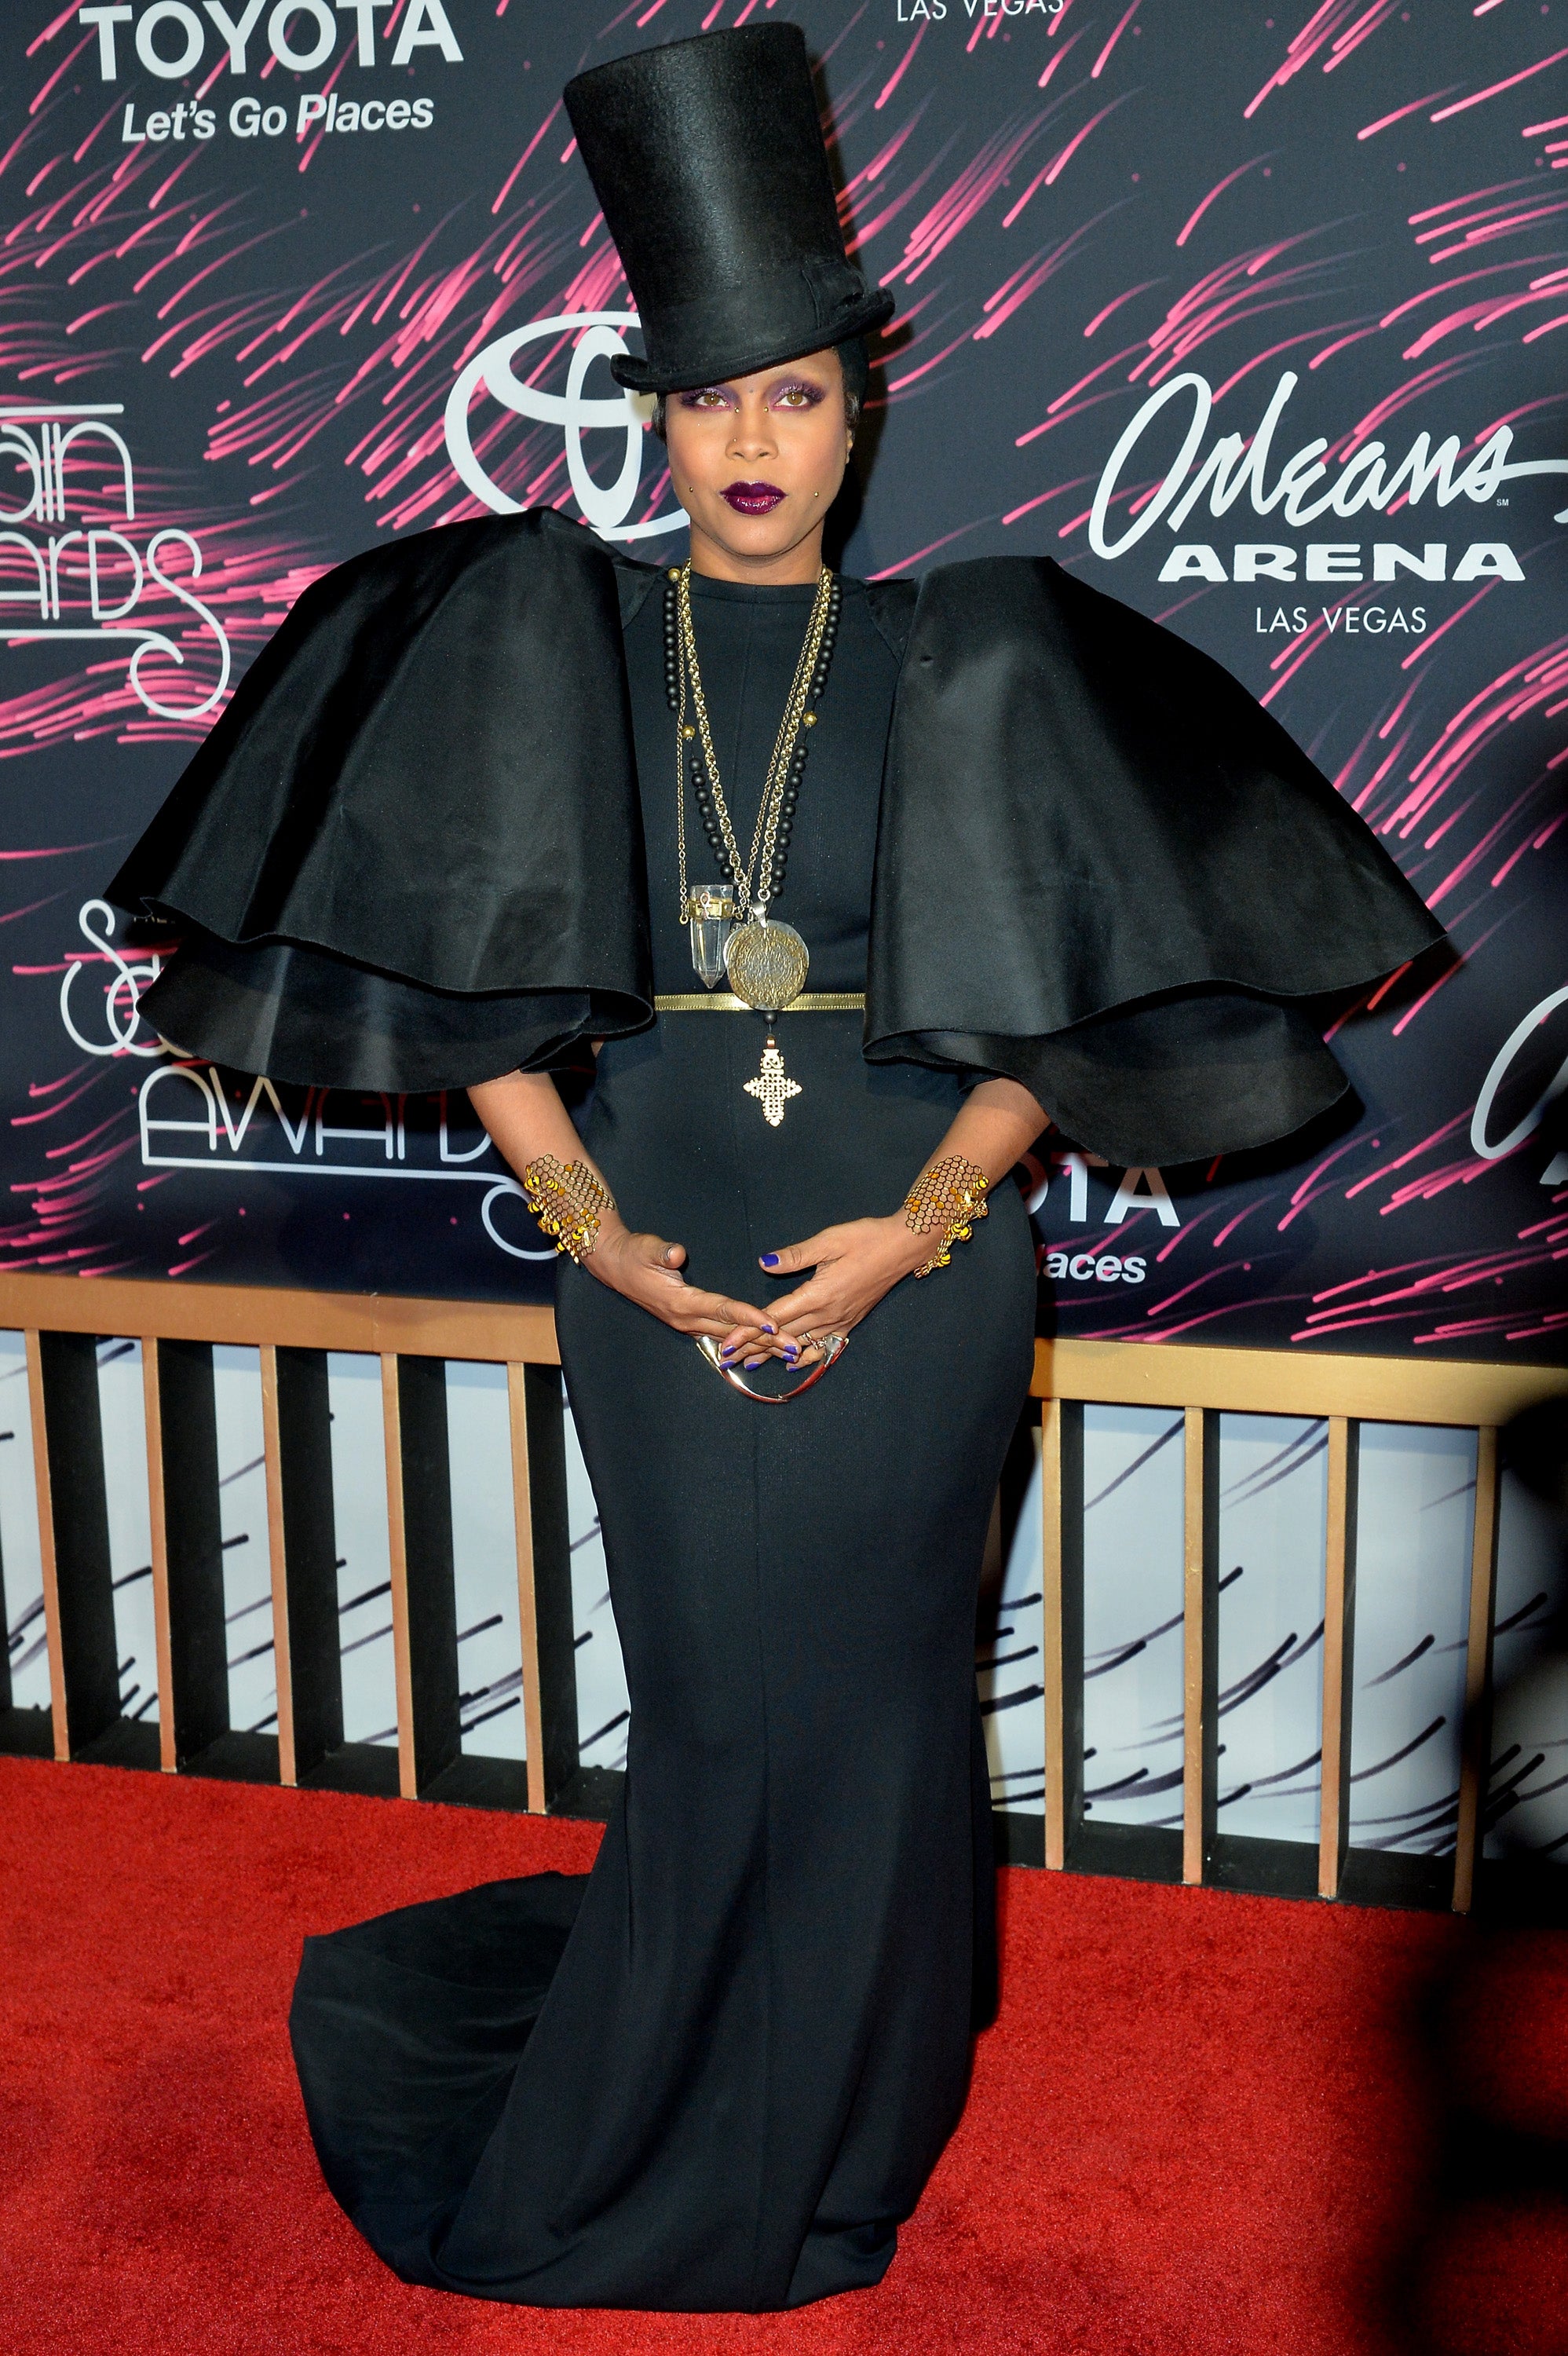 You'll Want to Watch the Soul Train Awards Just to See Erykah Badu's Statement-Making Looks